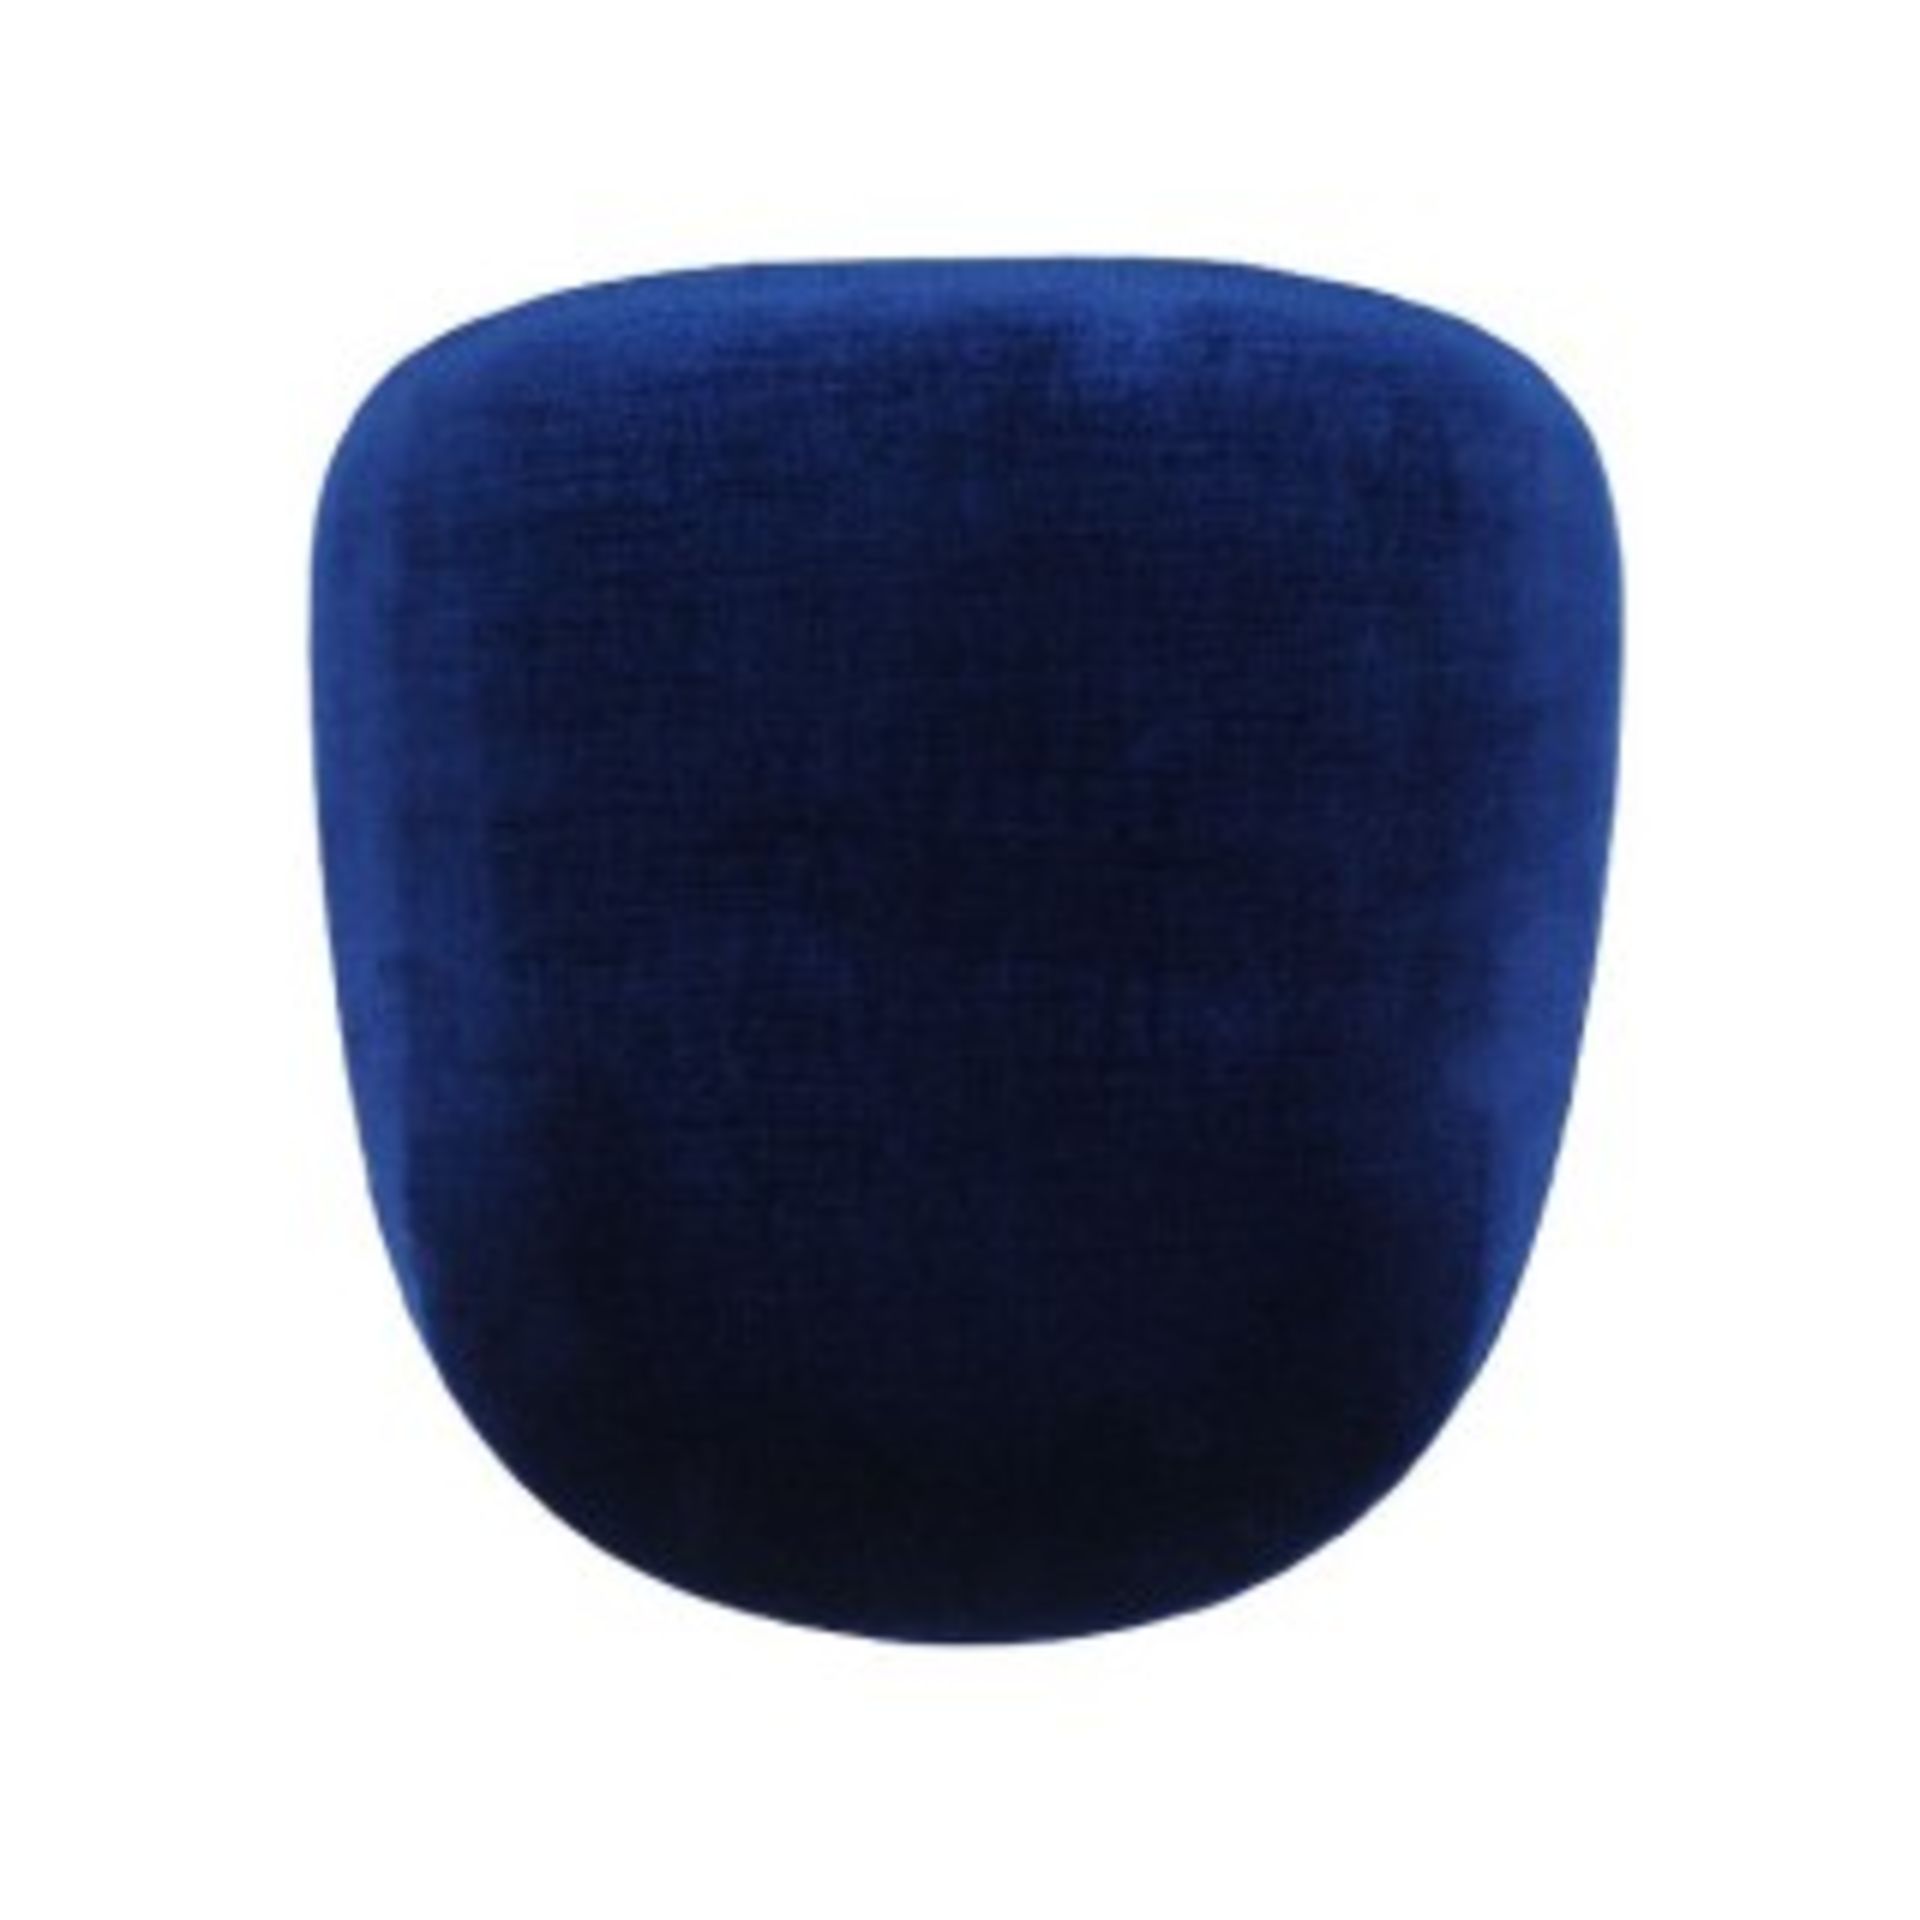 50 x Dark blue seat pads with velcro /Collection Available on Thur 30th Sept/Fri 1st Oct 9am till